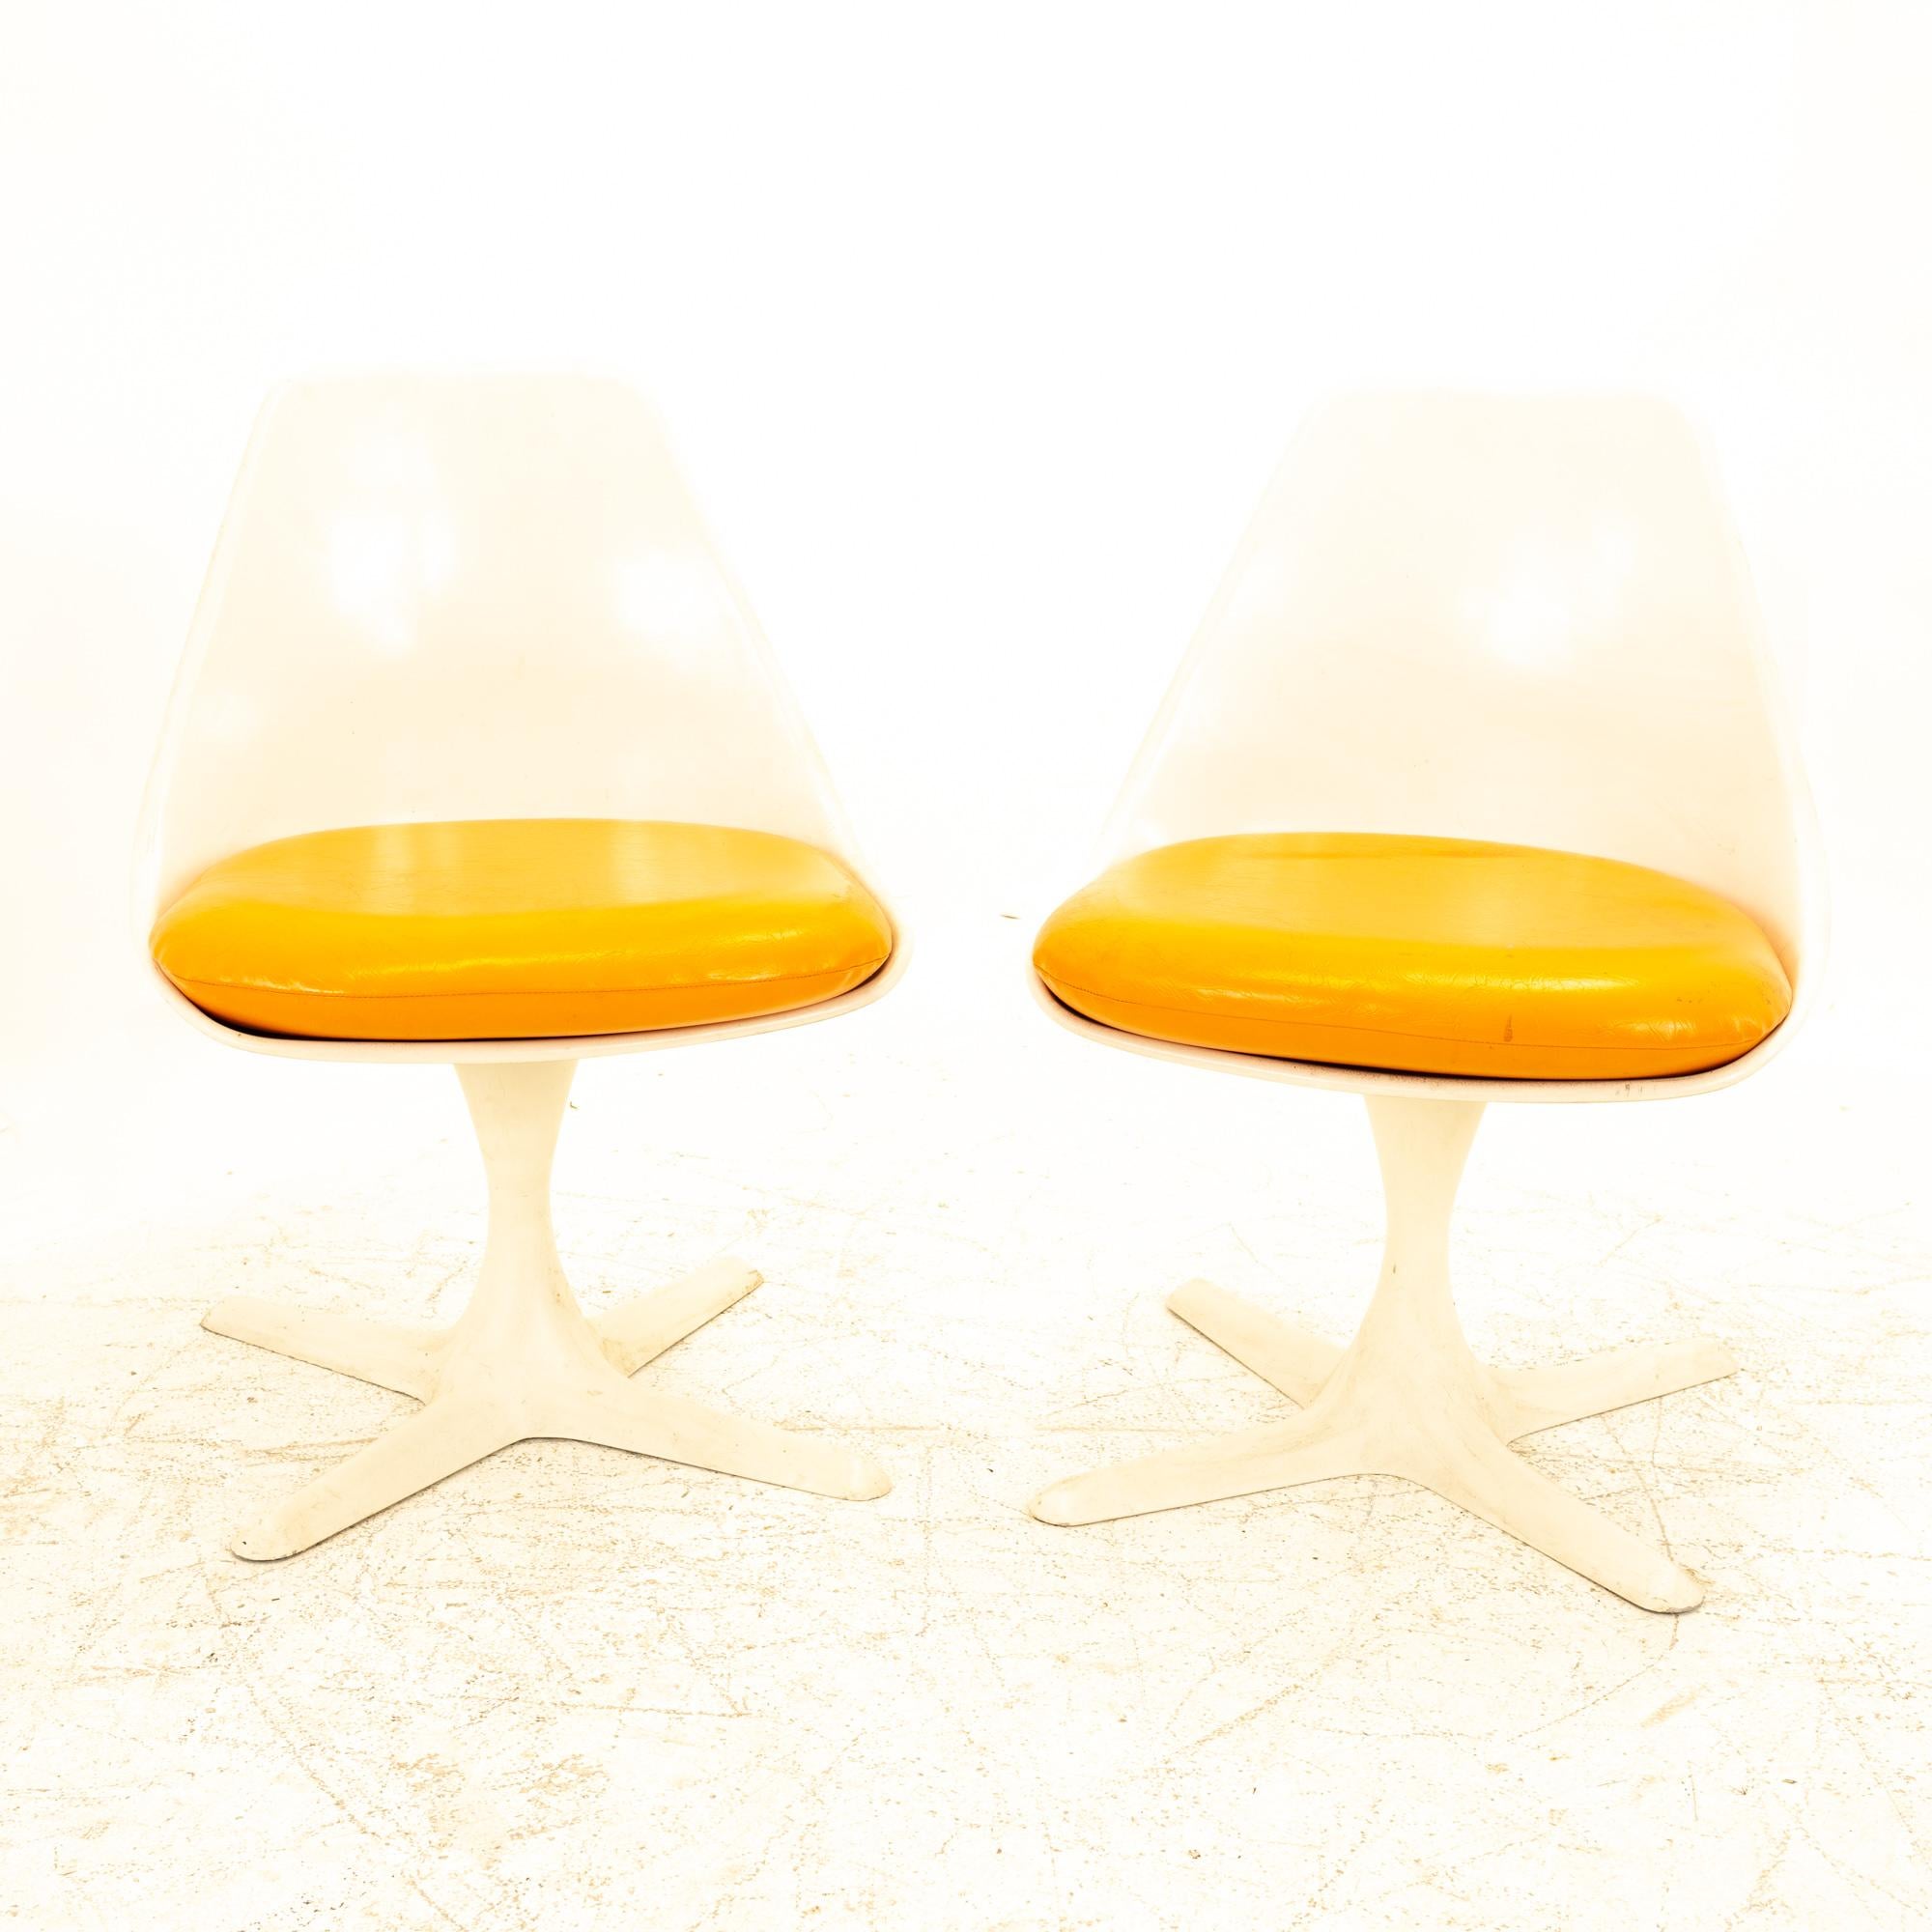 Burke Mid Century orange tulip chairs, pair

Each chair measures: 20.25 wide x 21 deep x 28.25 high, with a seat height of 15.75 inches

All pieces of furniture can be had in what we call restored vintage condition. That means the piece is restored